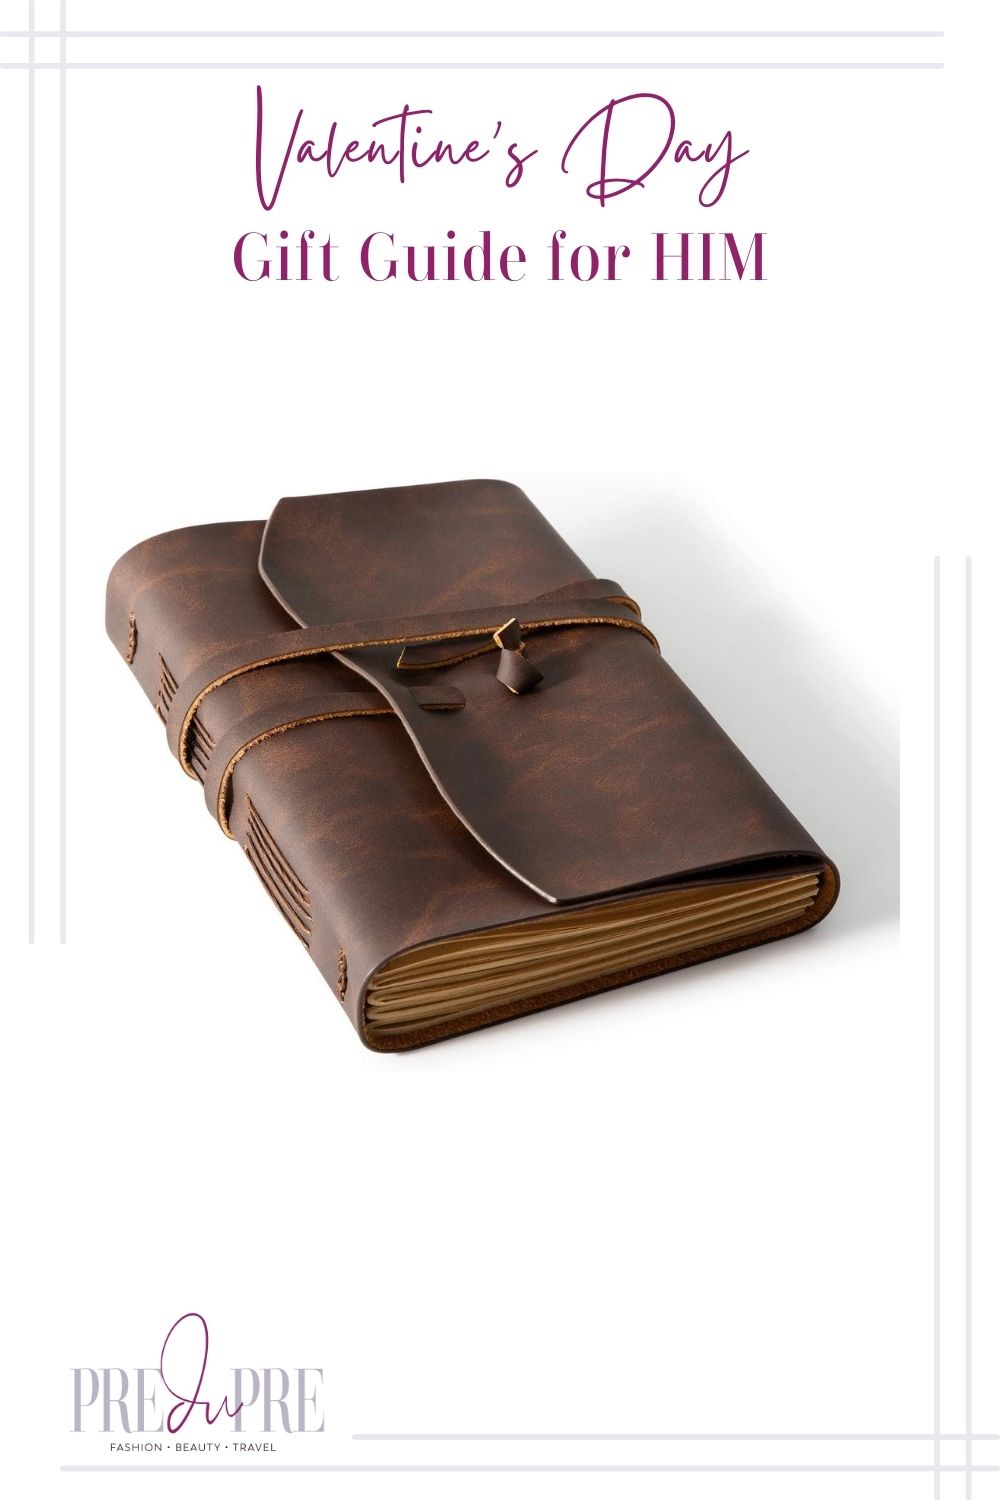 A brown leather journal image with text in the center top stating "Valentine's Day Gift Guide for Him."